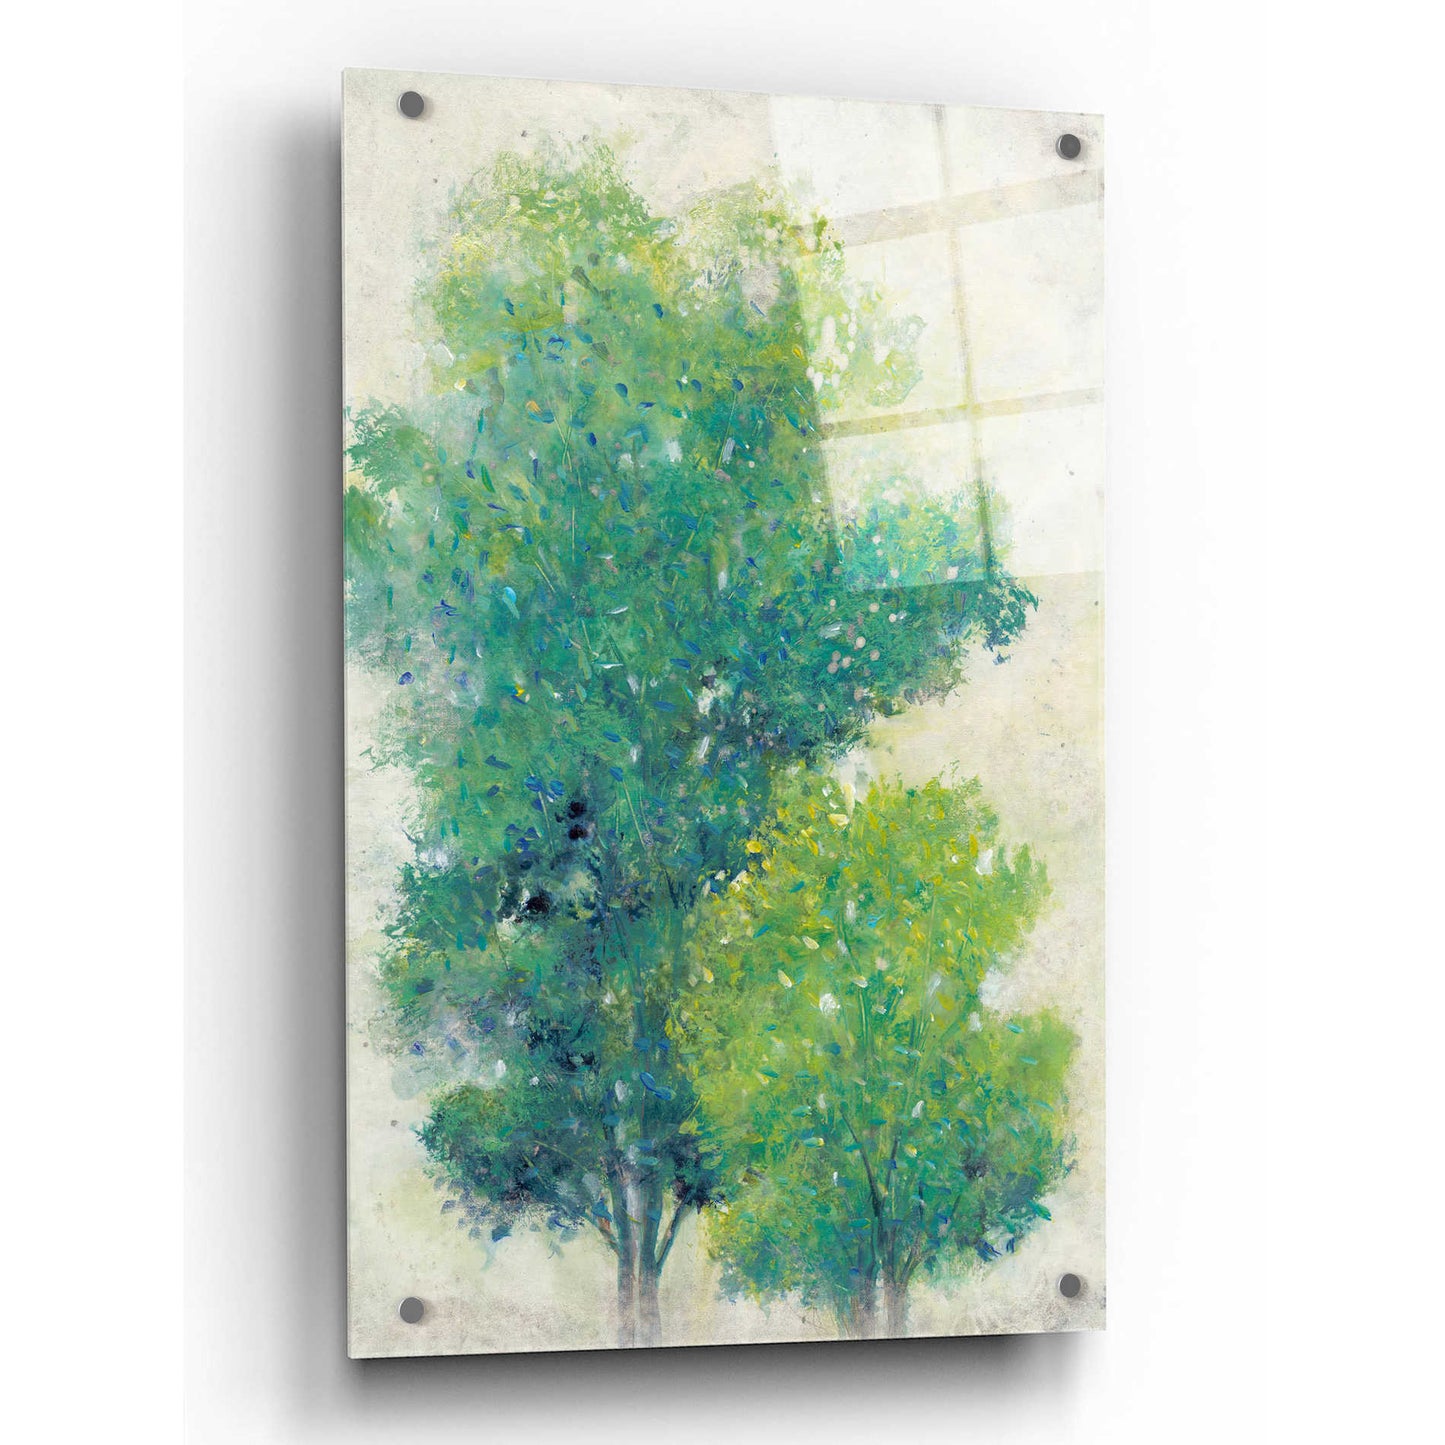 Epic Art 'A Pair of Trees I' by Tim O'Toole, Acrylic Glass Wall Art,24x36